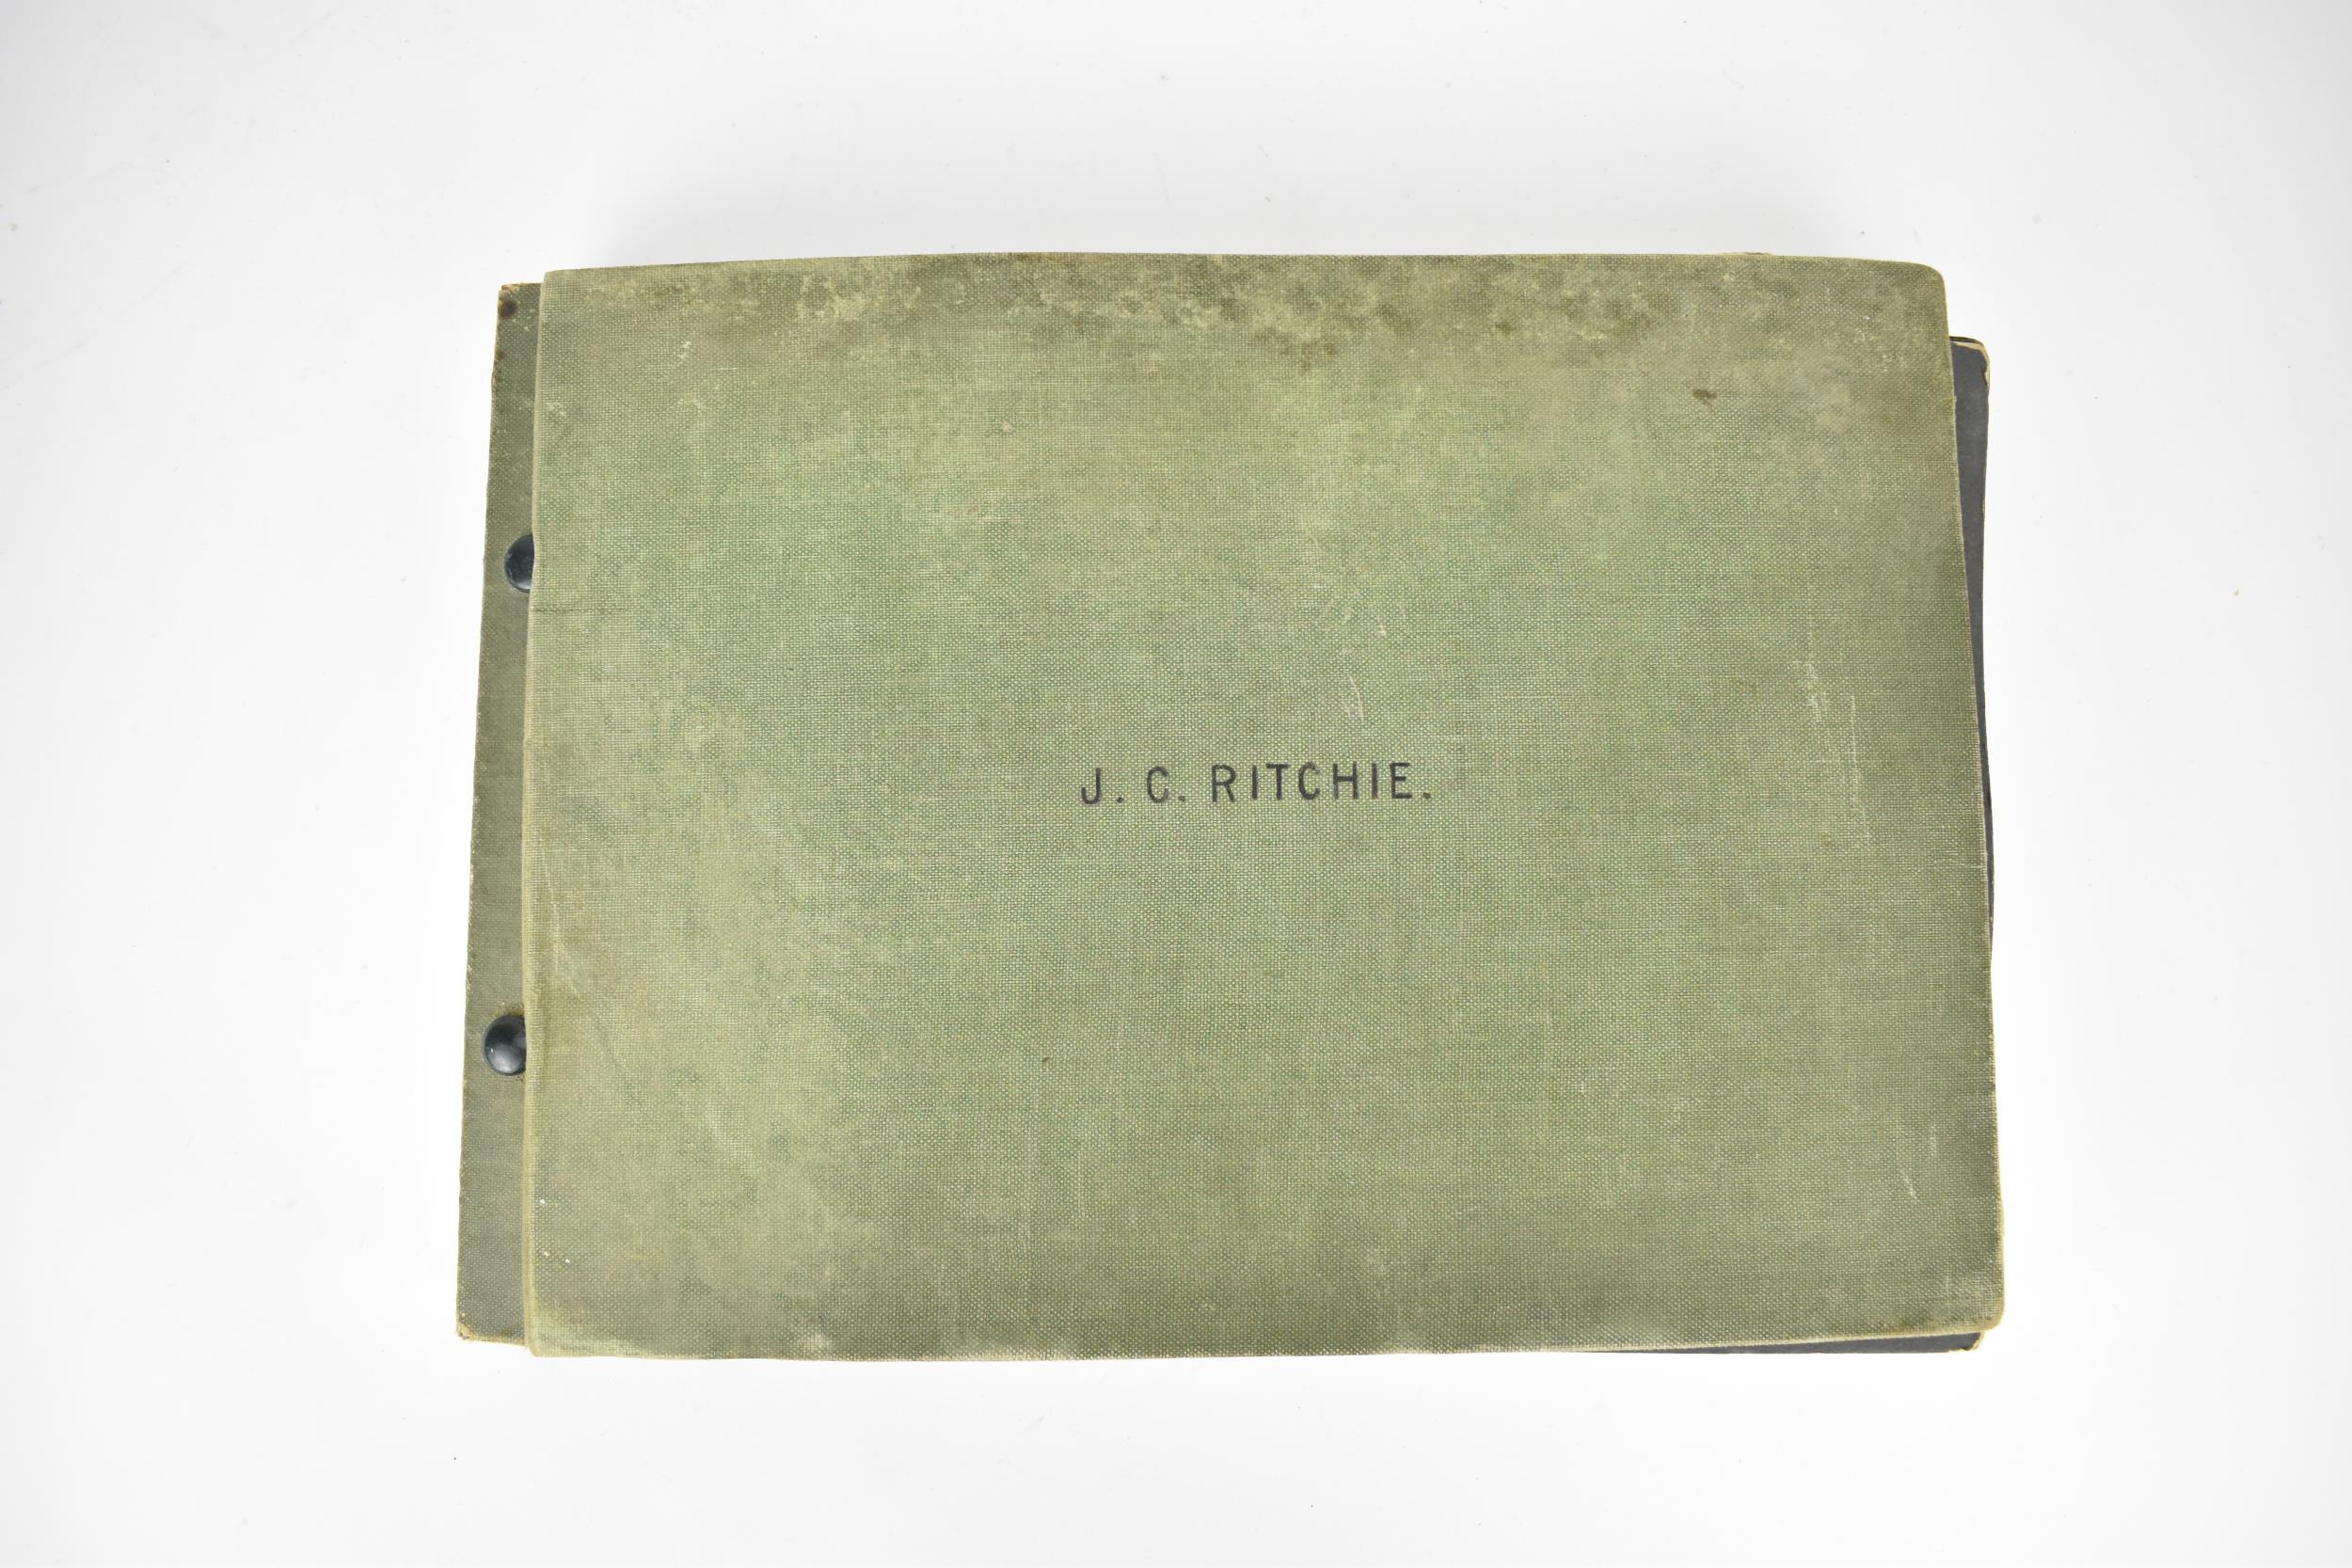 A photographic album of the British Army 1st Battalion regiment 'Black Watch' sent to India